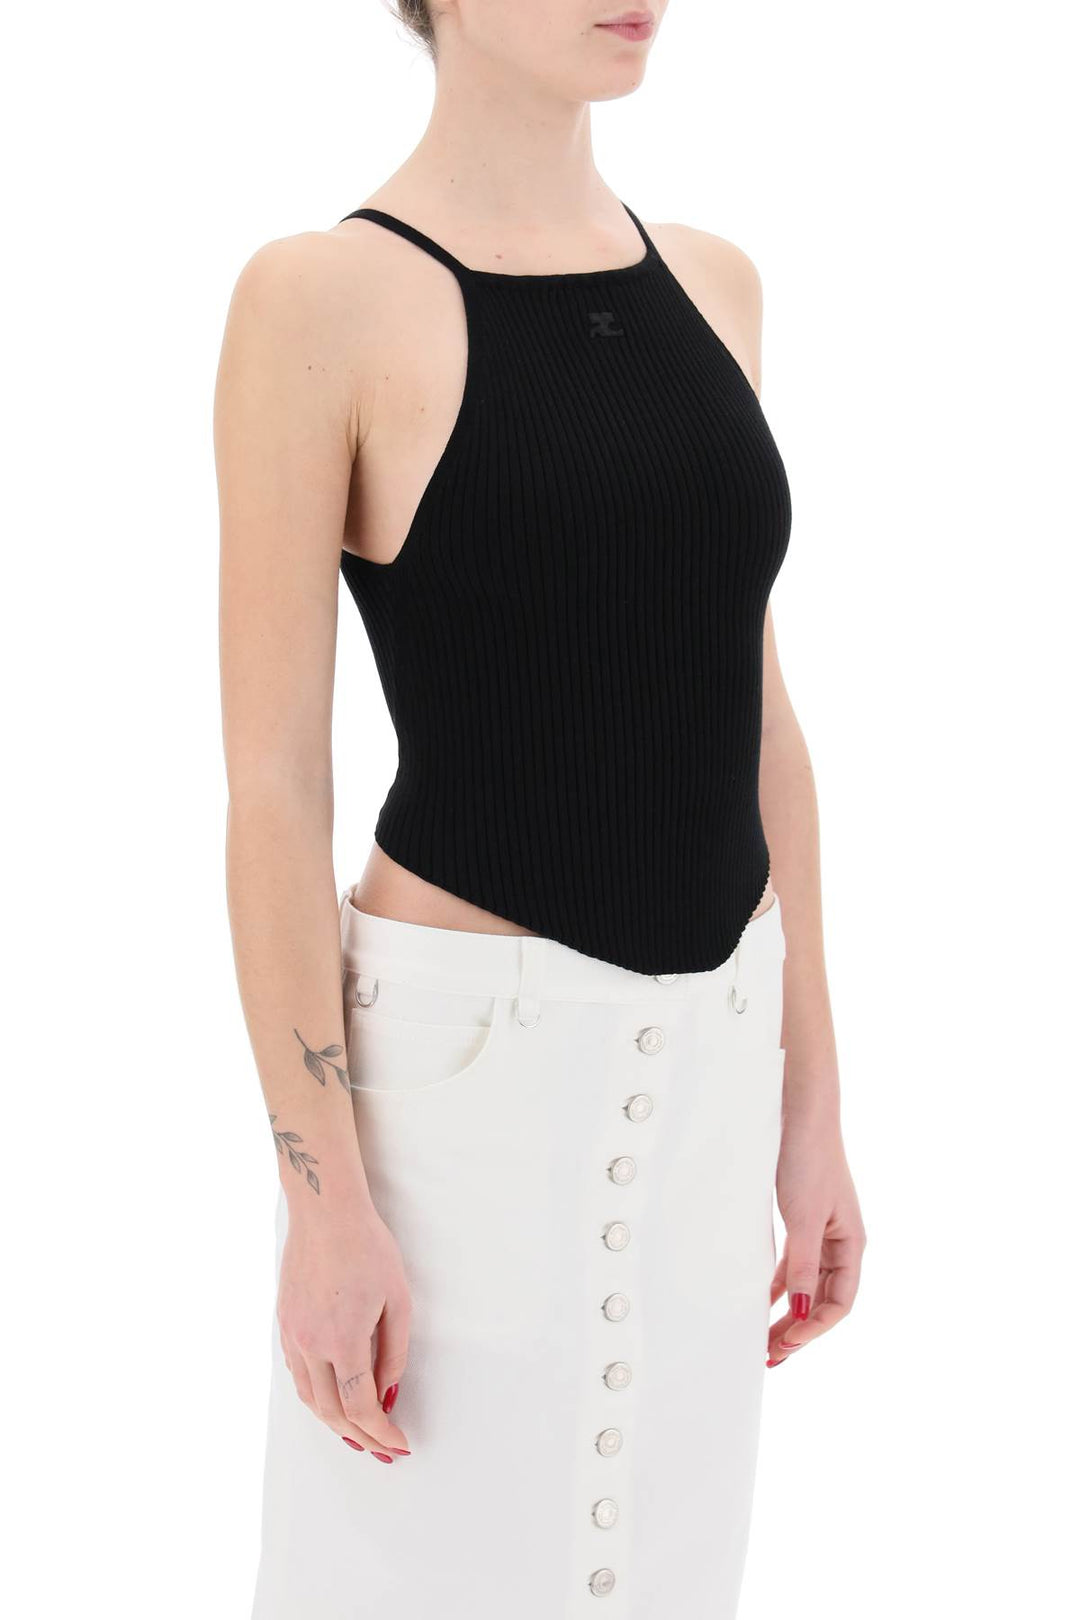 Courreges Replace With Double Quoteribbed Knit Holistic Top   Nero